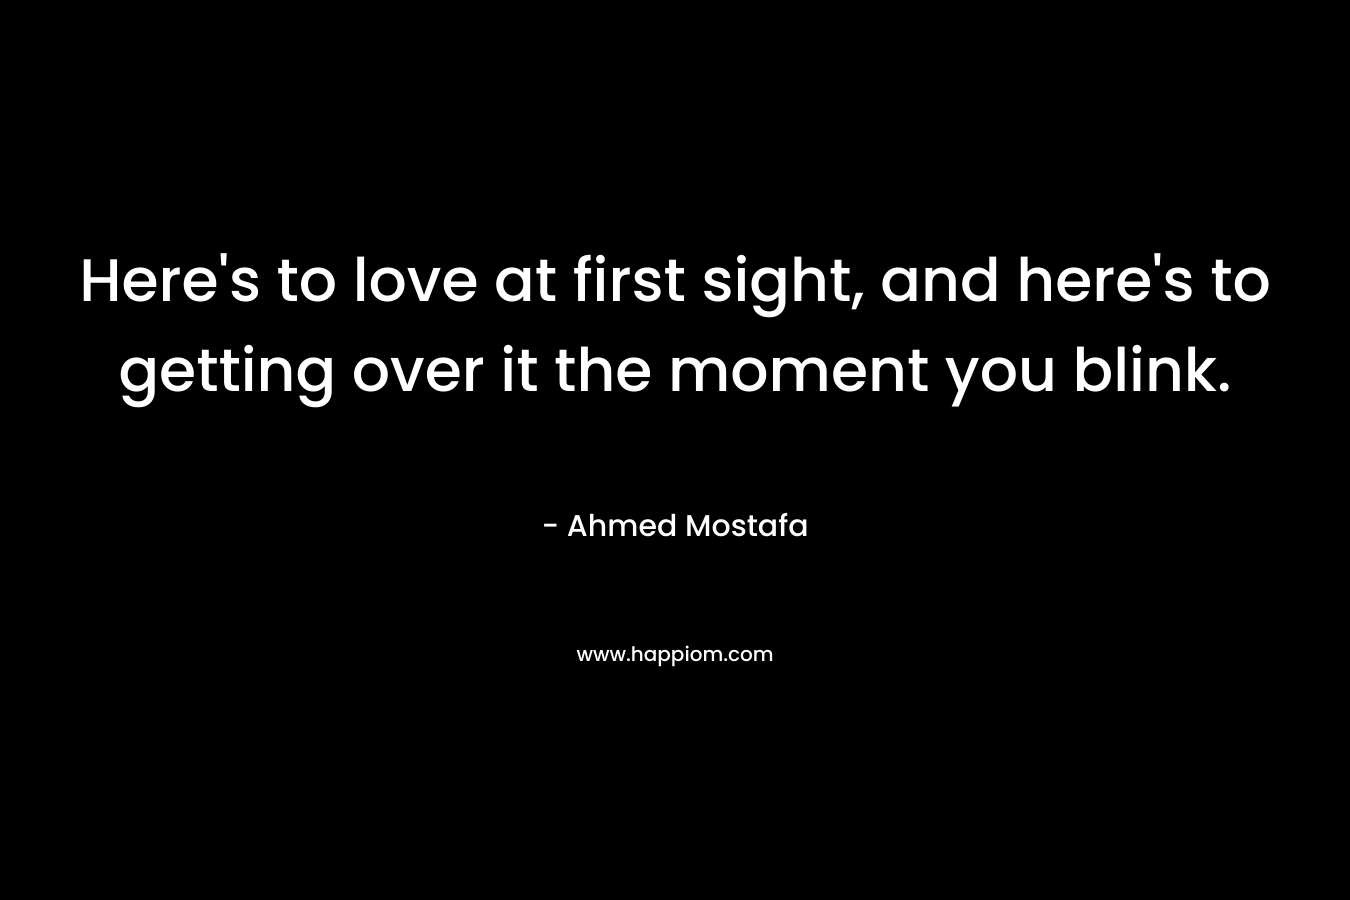 Here’s to love at first sight, and here’s to getting over it the moment you blink. – Ahmed Mostafa